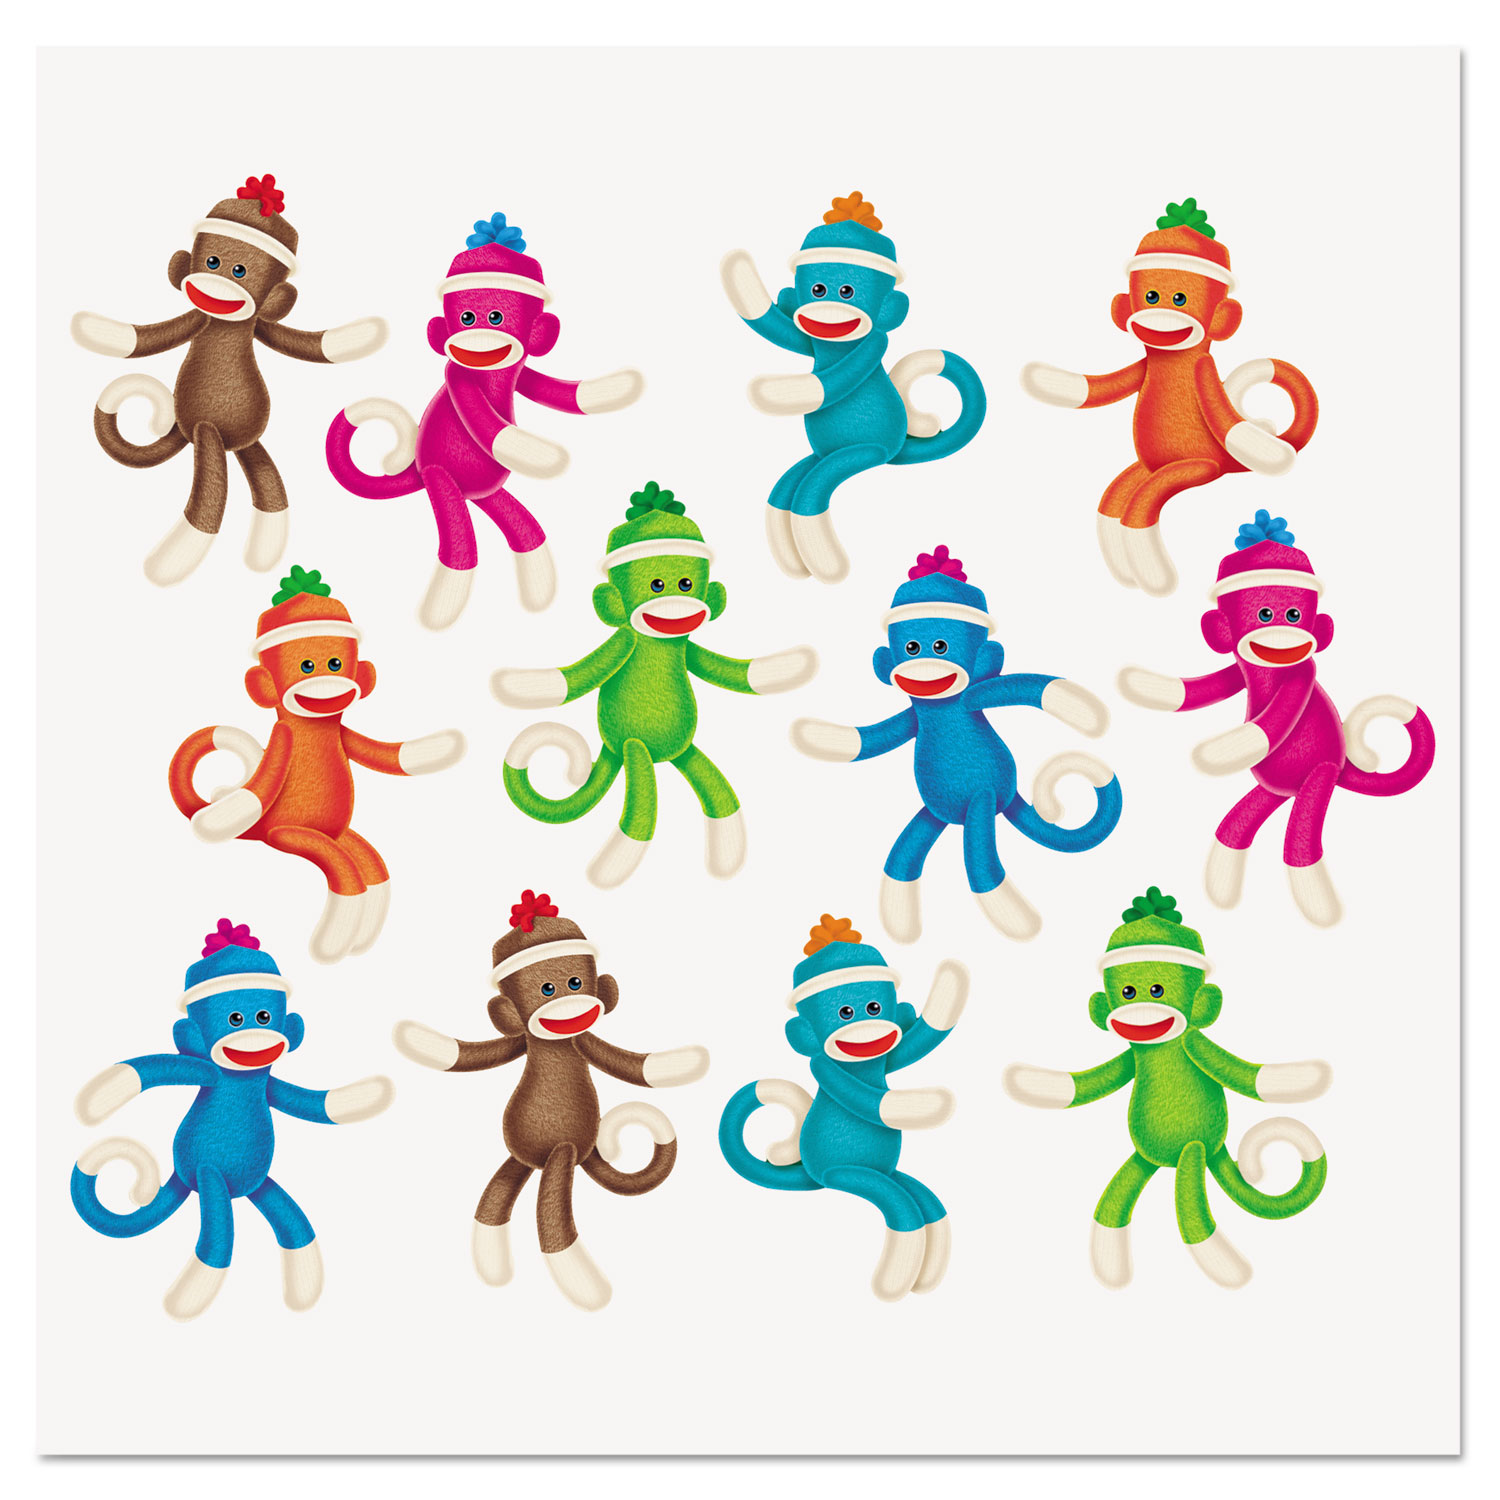  TREND T10608 Sock Monkeys Classic Accents Variety Pack, 6, 36 Pieces (TEPT10608) 